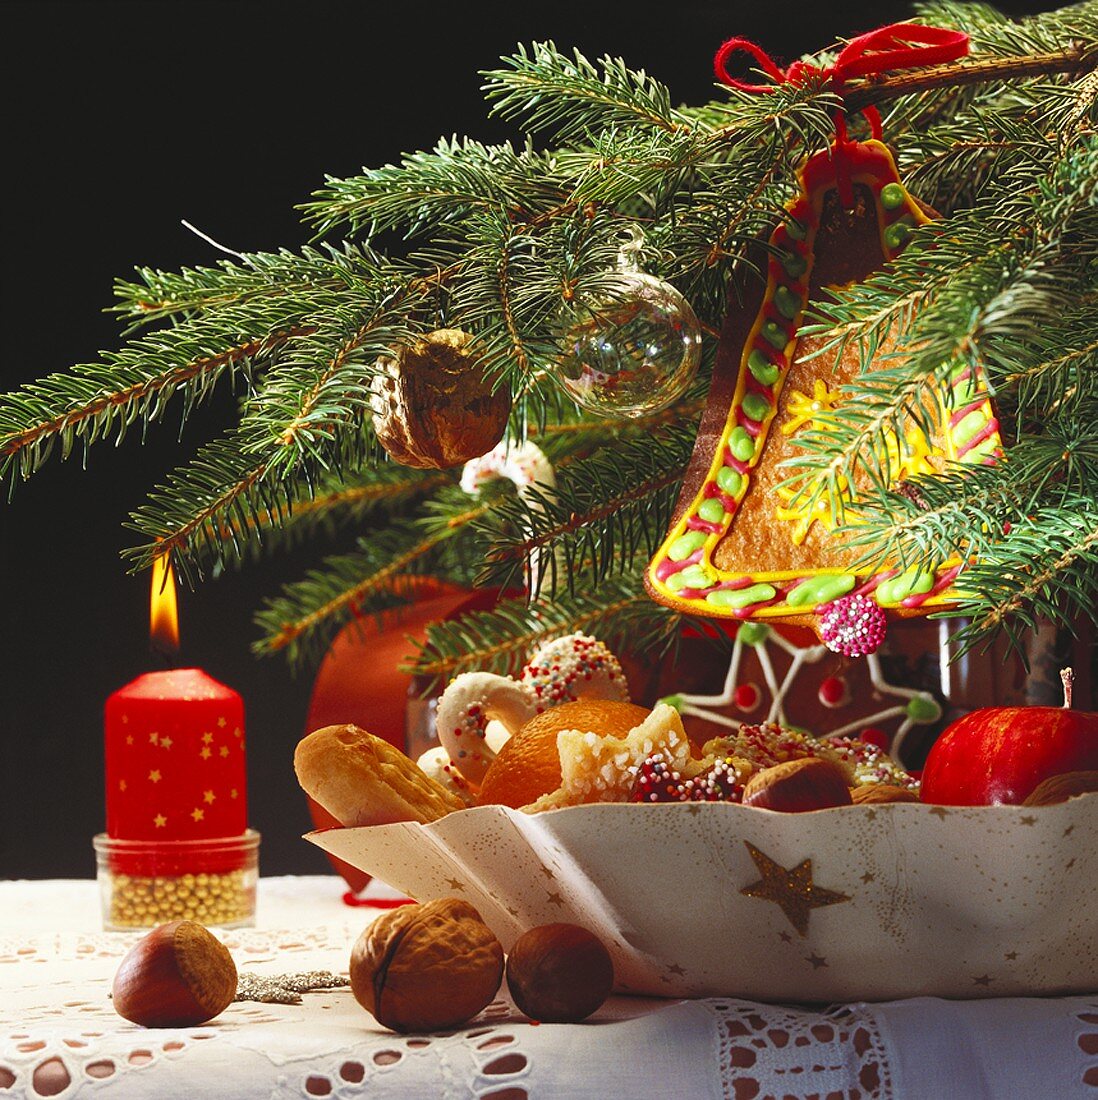 Plate of biscuits, candle, fir branch with tree ornaments